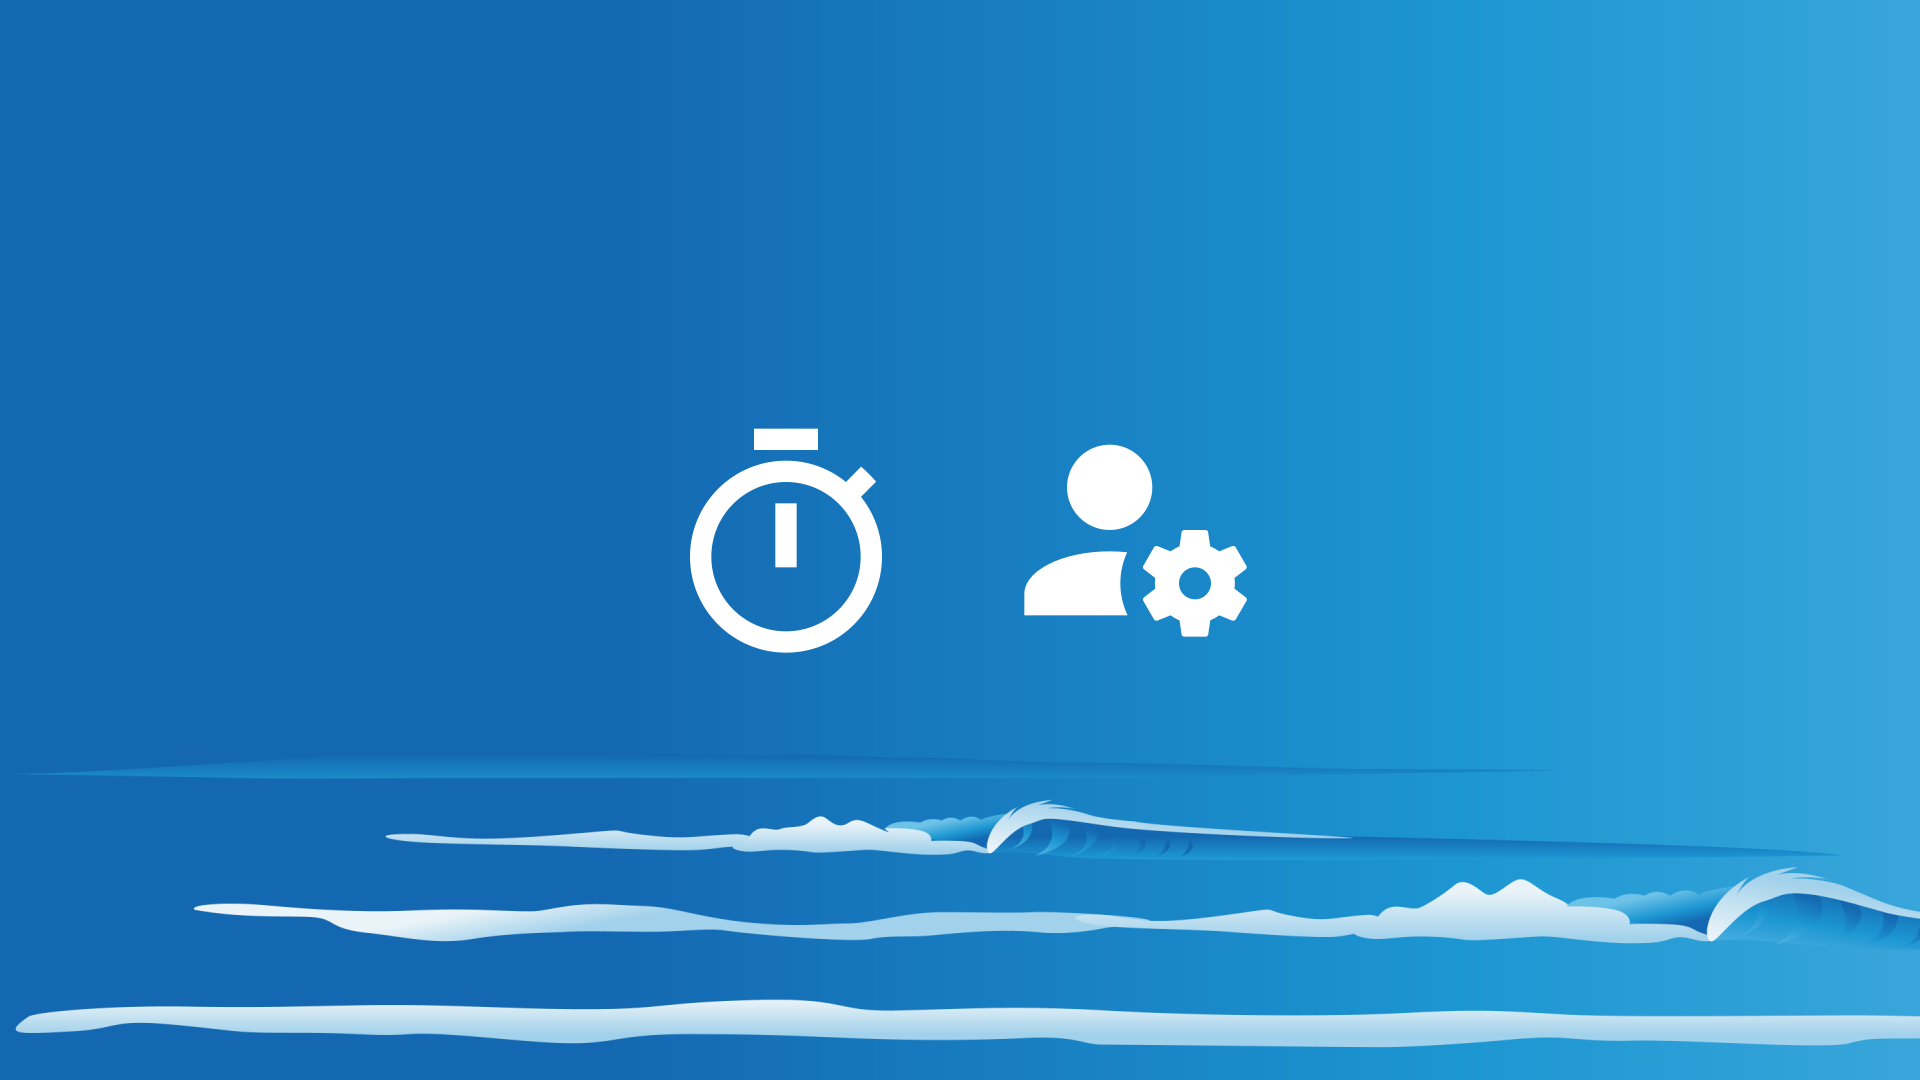 Sea background with stopwatch icon and account settings icon